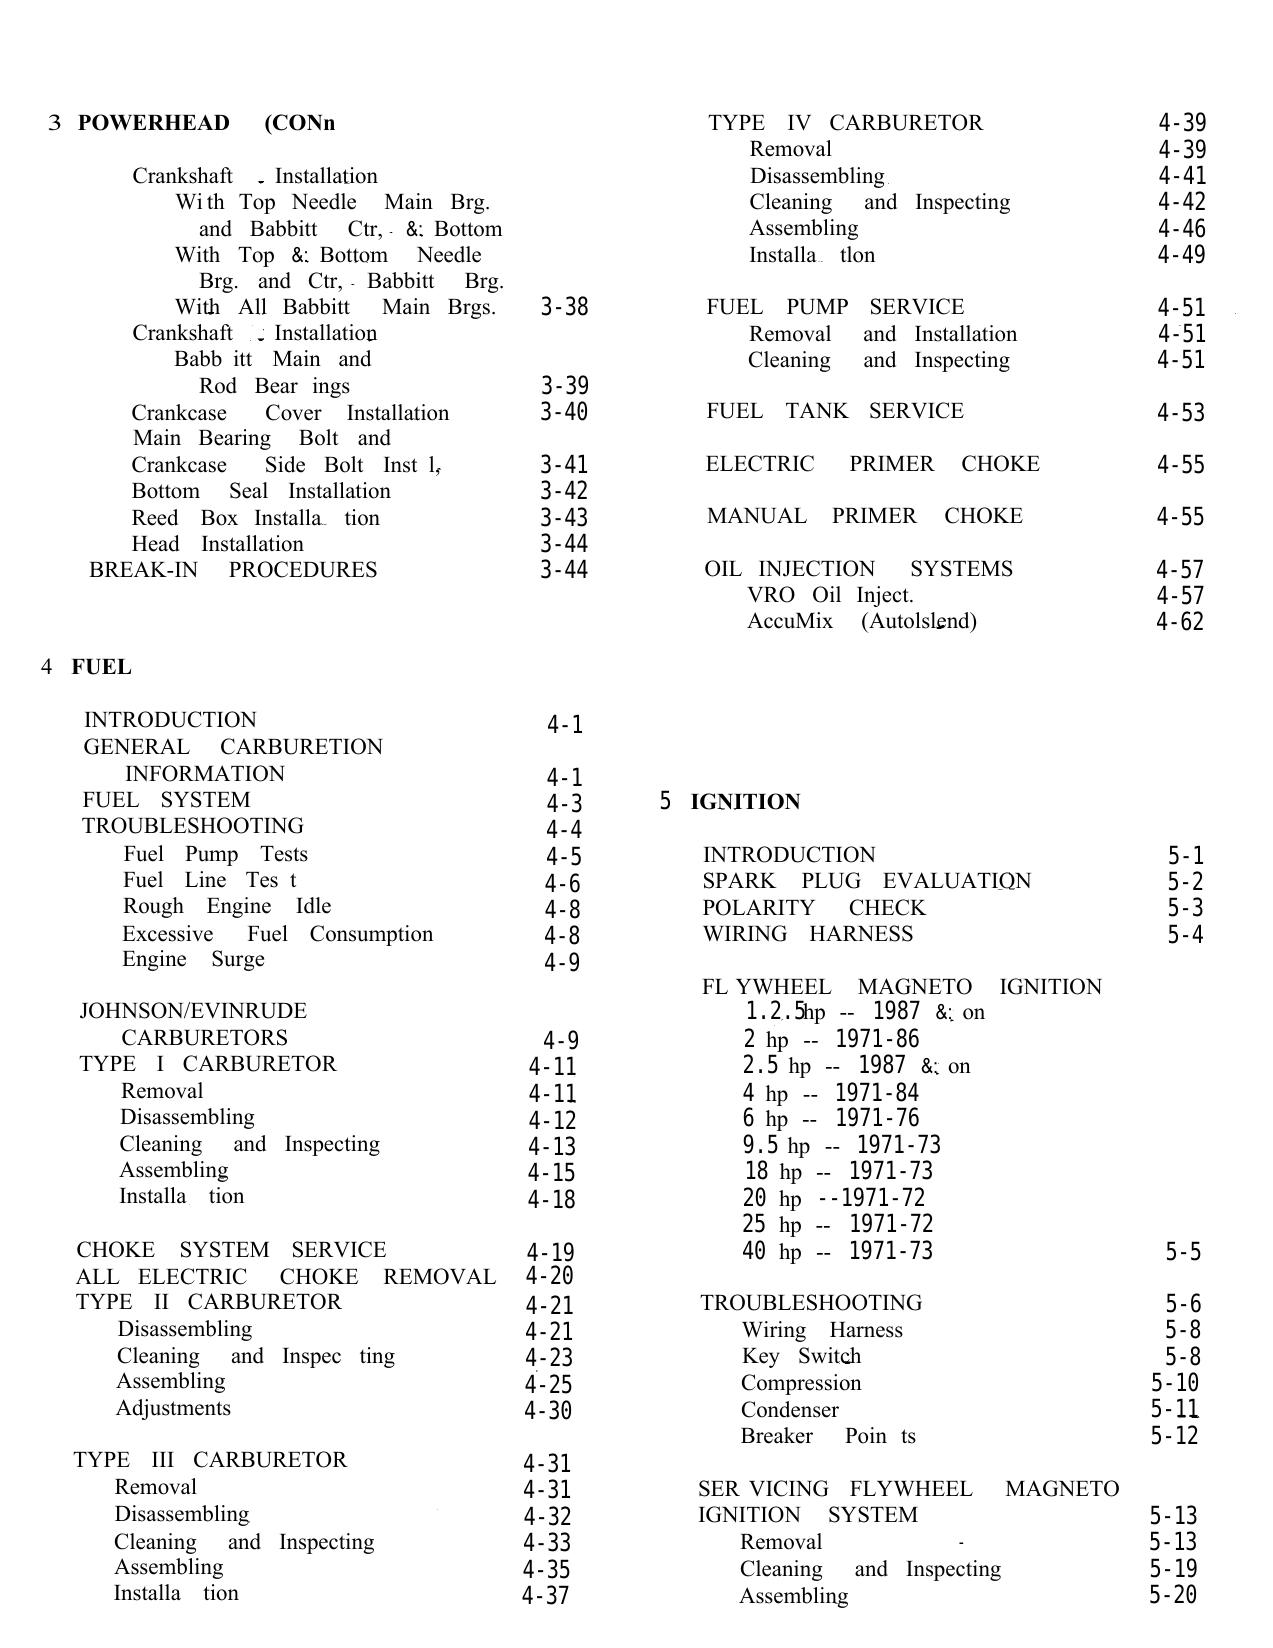 1971-1989 Johnson Evinrude 1 hp - 60 hp outboard engine service manual Preview image 4